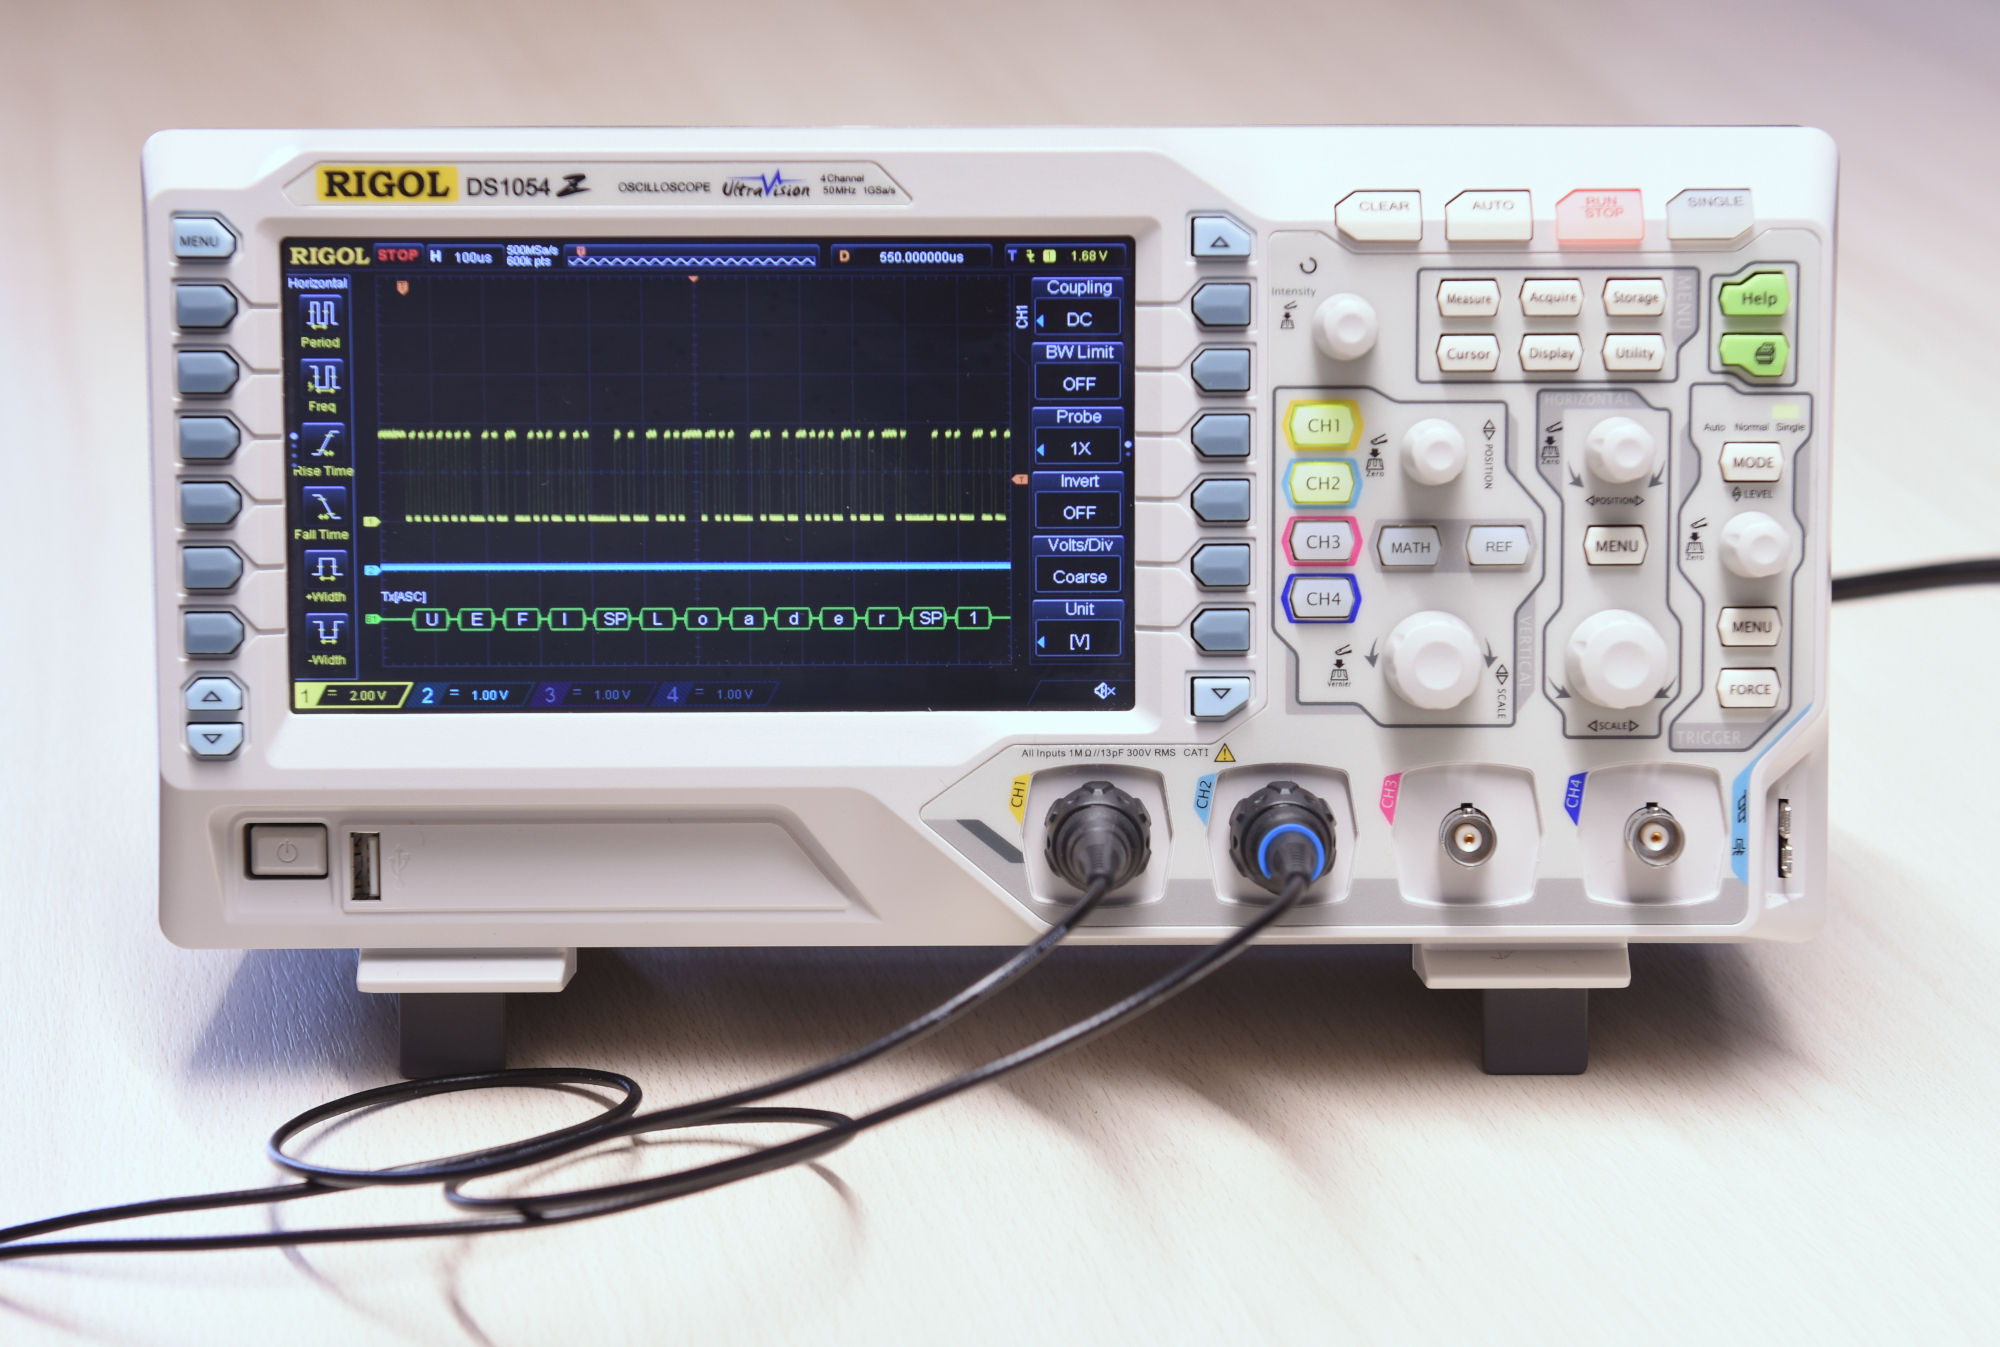 Oscilloscope Connected to Canon C5850i Mainboard Connector J32, Showing Printer Boot Messages on the Oscilloscope